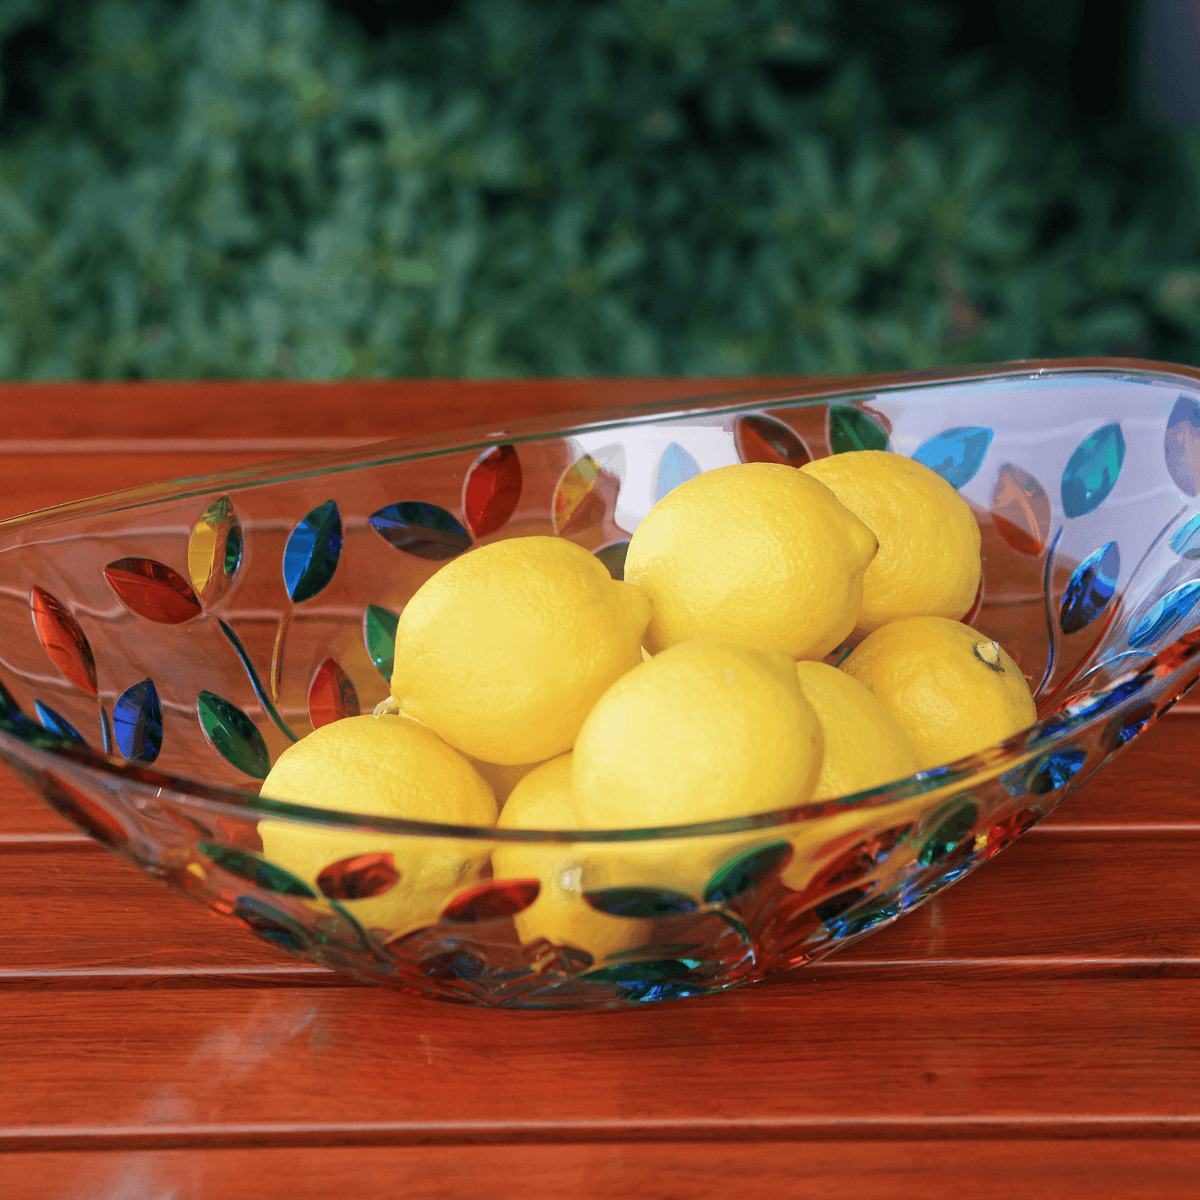 floral pattern in bright colors on an oval shaped italian crystal bowl filled with lemons